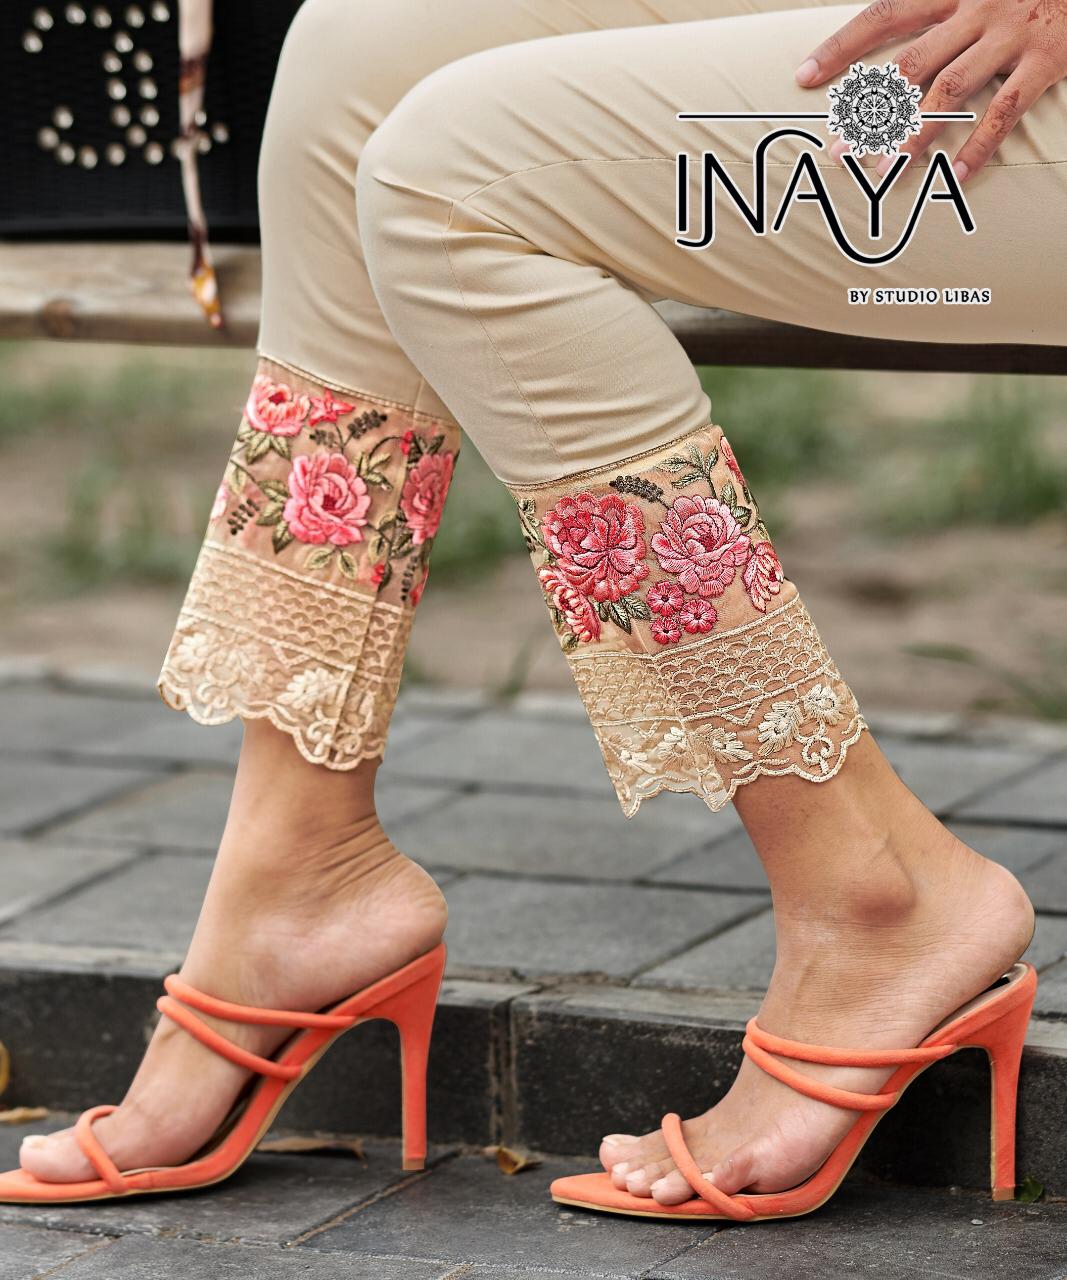 Inaya By Studio Libas Cigarettes 15 Stretchable Cotton Cigarette Pants Collection